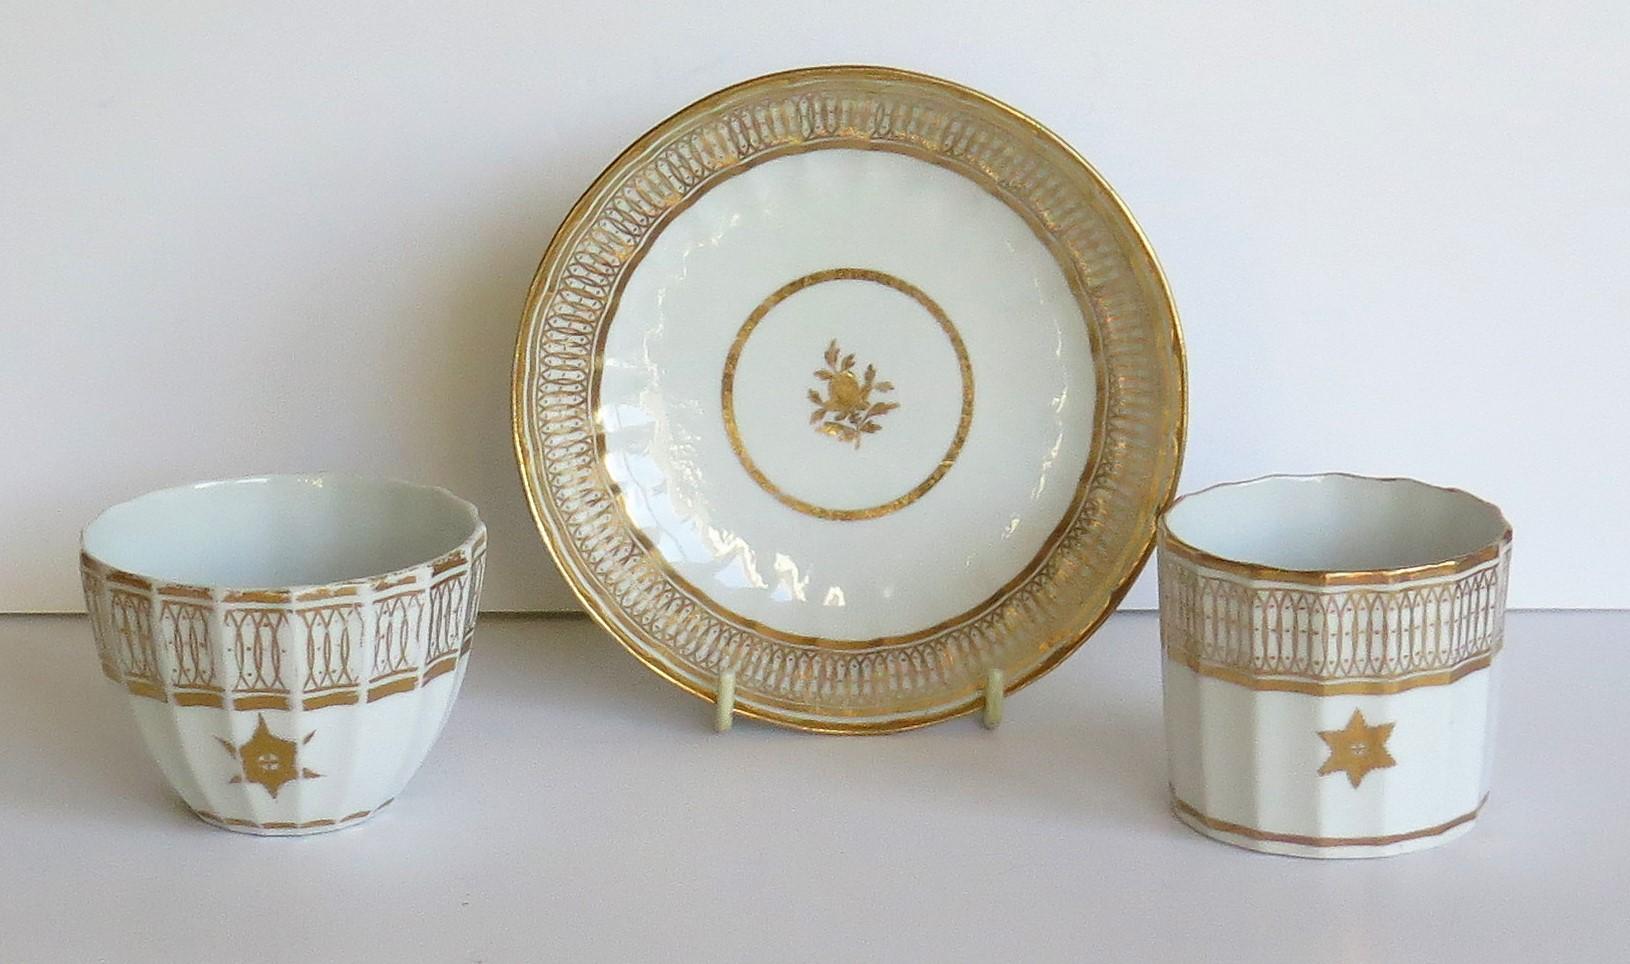 This is an early porcelain trio comprising a coffee can, tea cup and saucer, all in gilded patterns, which we attribute to Coalport, John Rose & Co., Shropshire, England, made at the turn of the 18th century, George 111rd period, circa 1800.

All